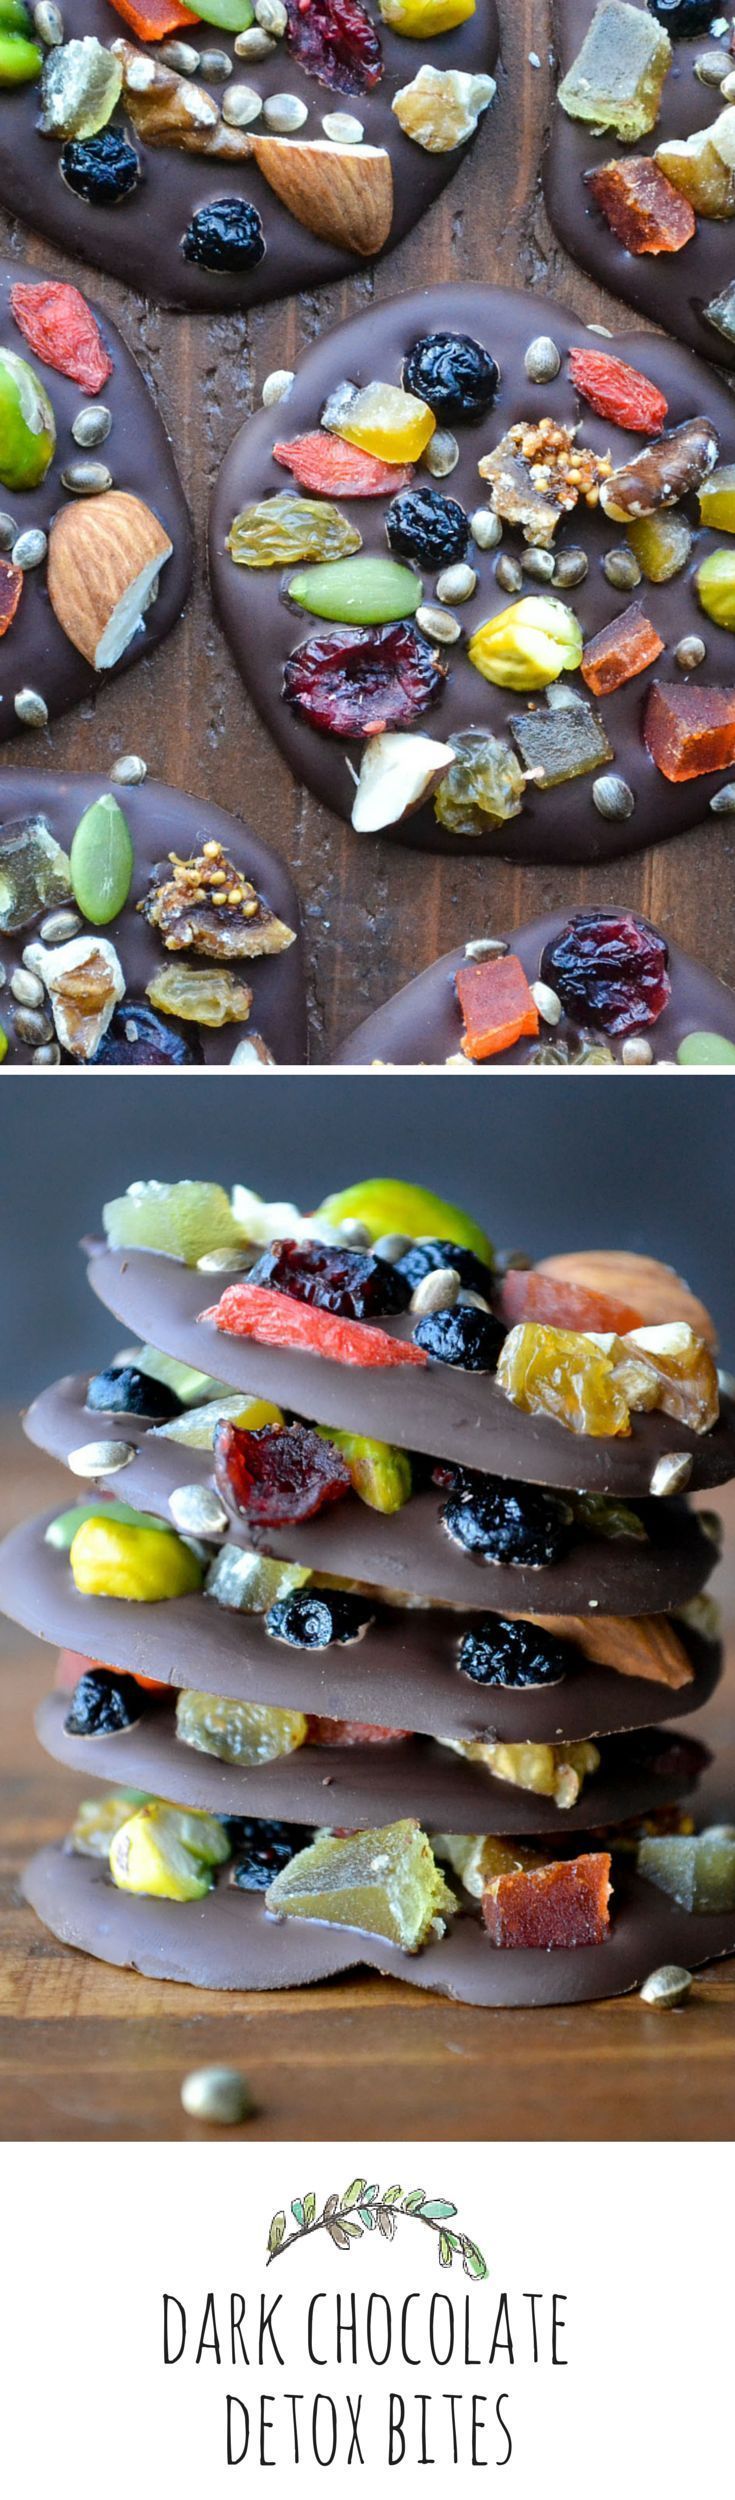 The healthy way to do dessert! Dark Chocolate Detox Bites – I cant wait to try these!